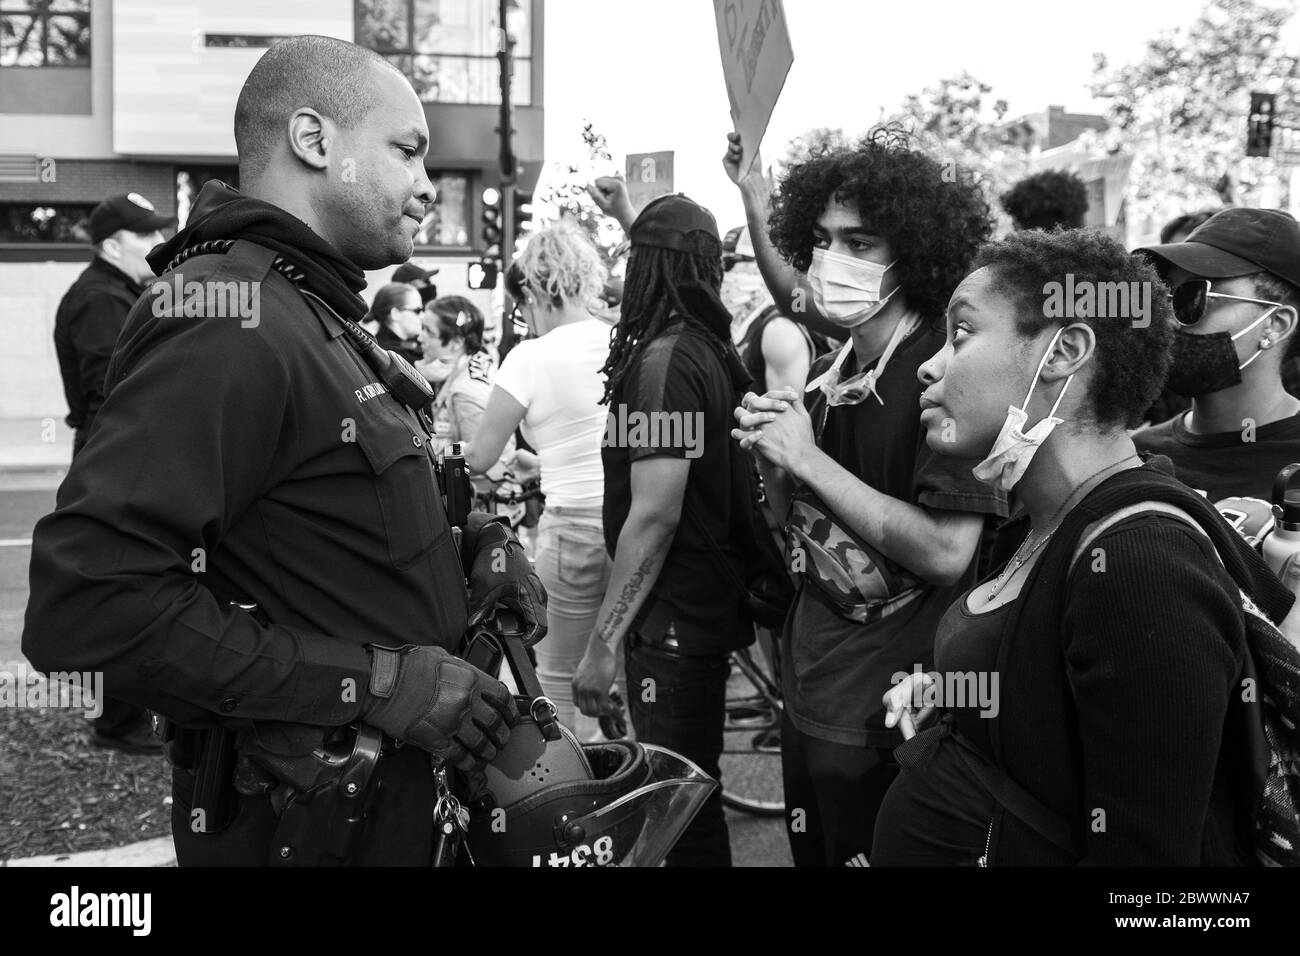 Oakland, Ca. 2nd June, 2020. A pregnant protestor speaks in sincerity to an Oakland Police Officer near the Oakland Police Department in Oakland, California on June 2, 2020 after the death of George Floyd. Credit: Chris Tuite/Image Space/Media Punch/Alamy Live News Stock Photo